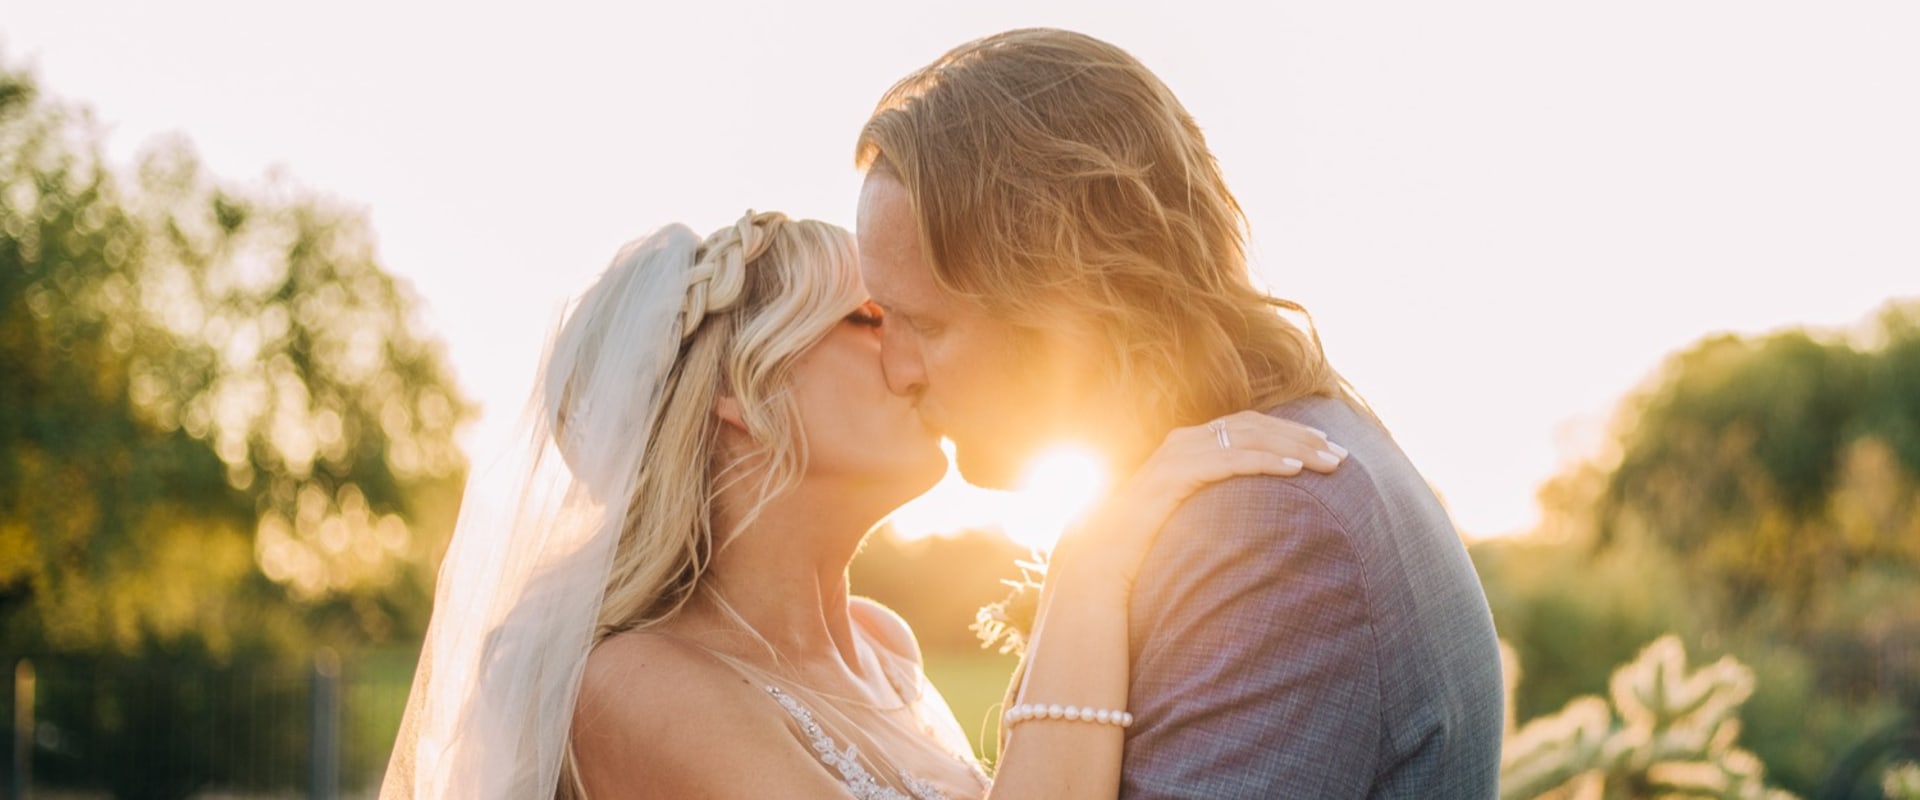 How Many Photos Should You Receive From Your Wedding Photographer?